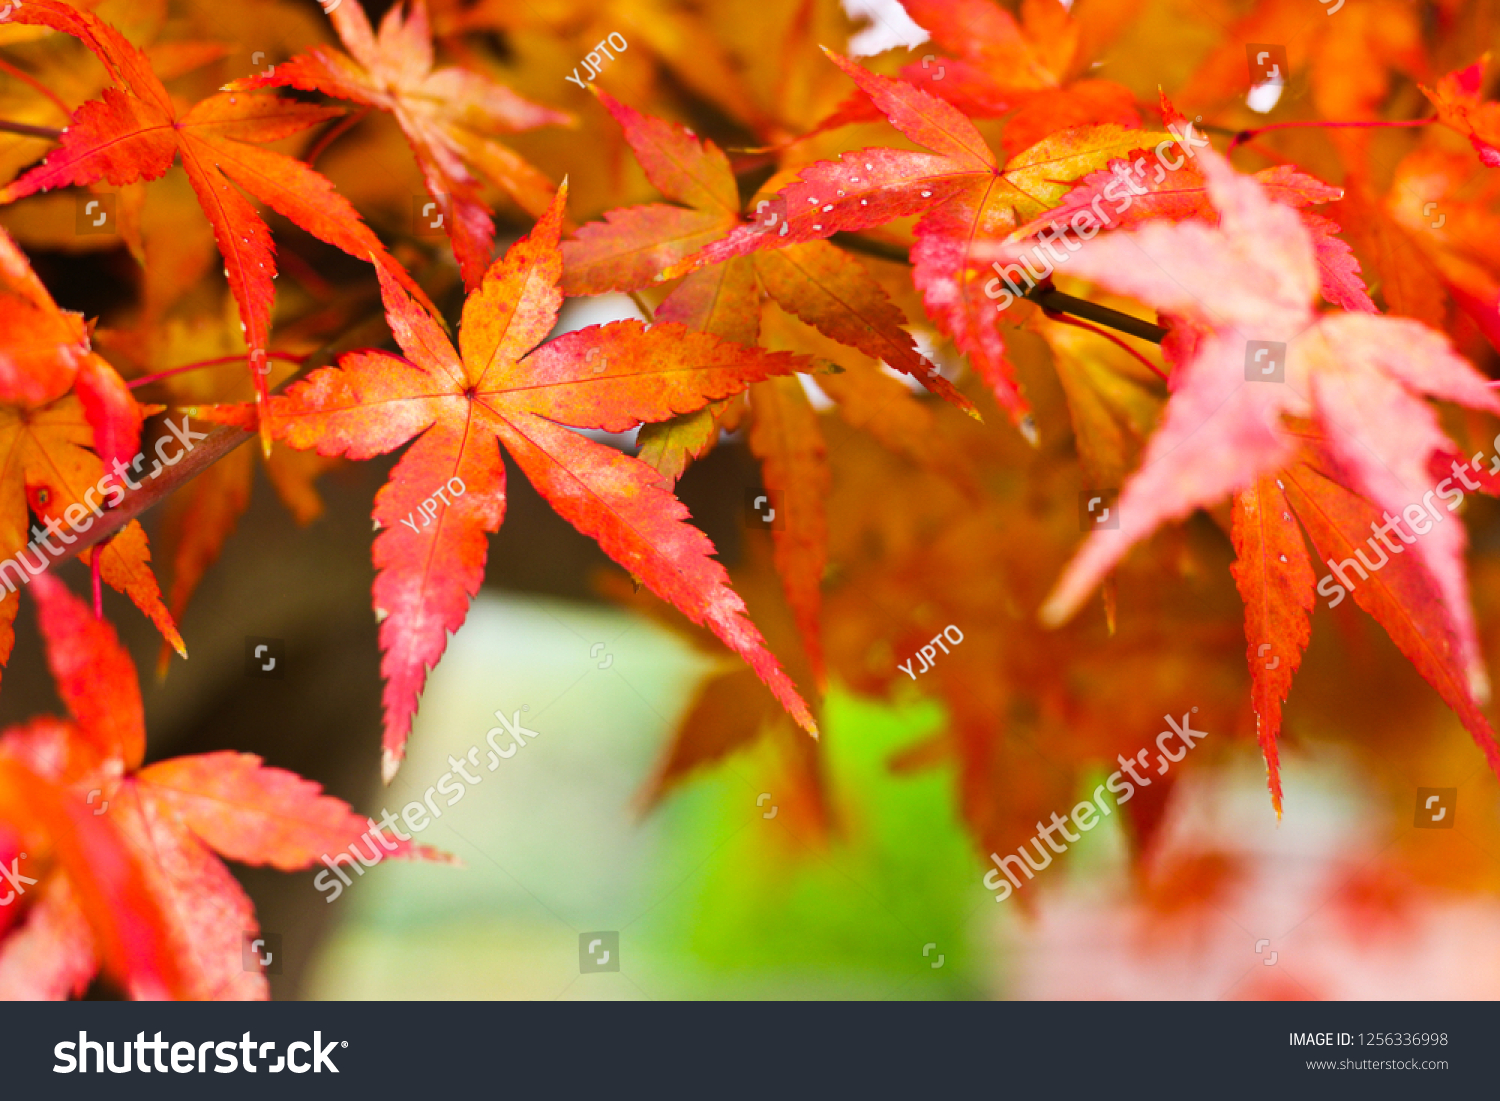 The colorful autumn leaves, Kyoto, Japan #1256336998